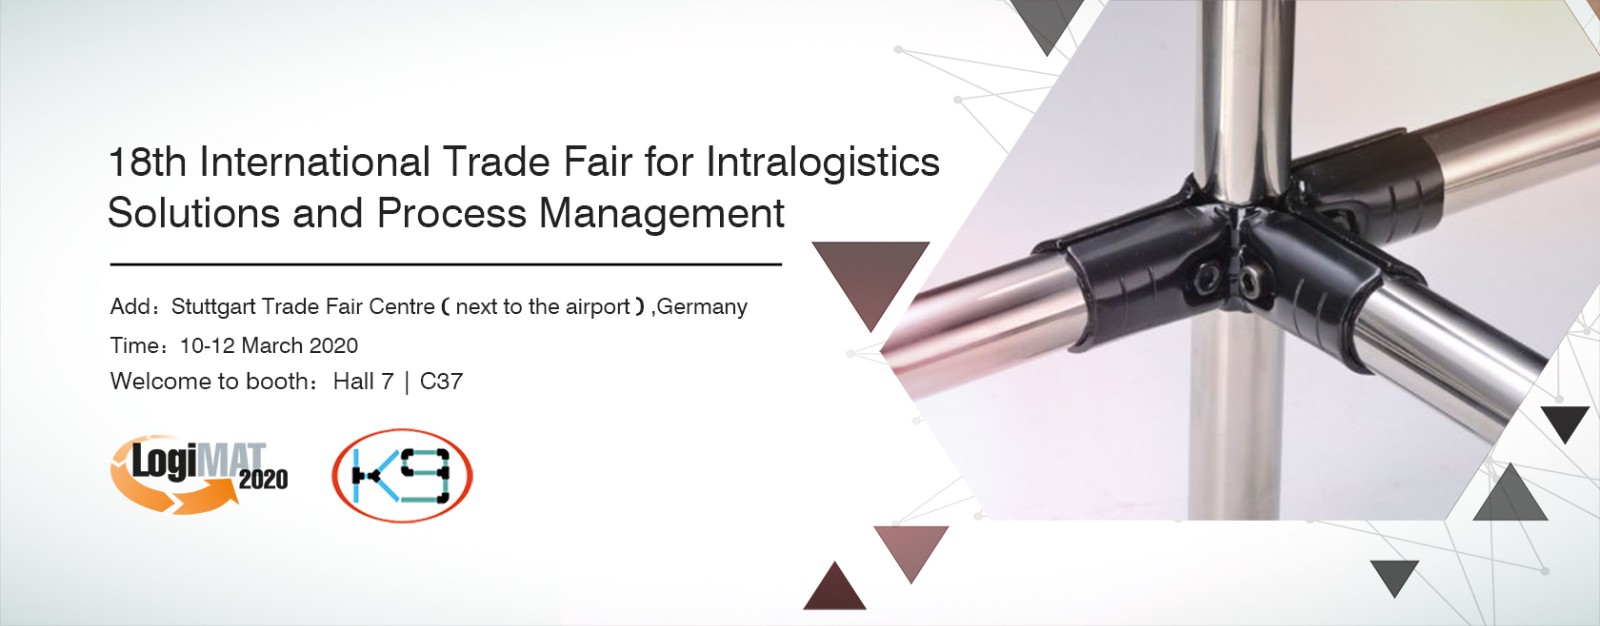 LogiMAT 2020-18th International Trade Fair for Intralogistics Solutions and Process Management